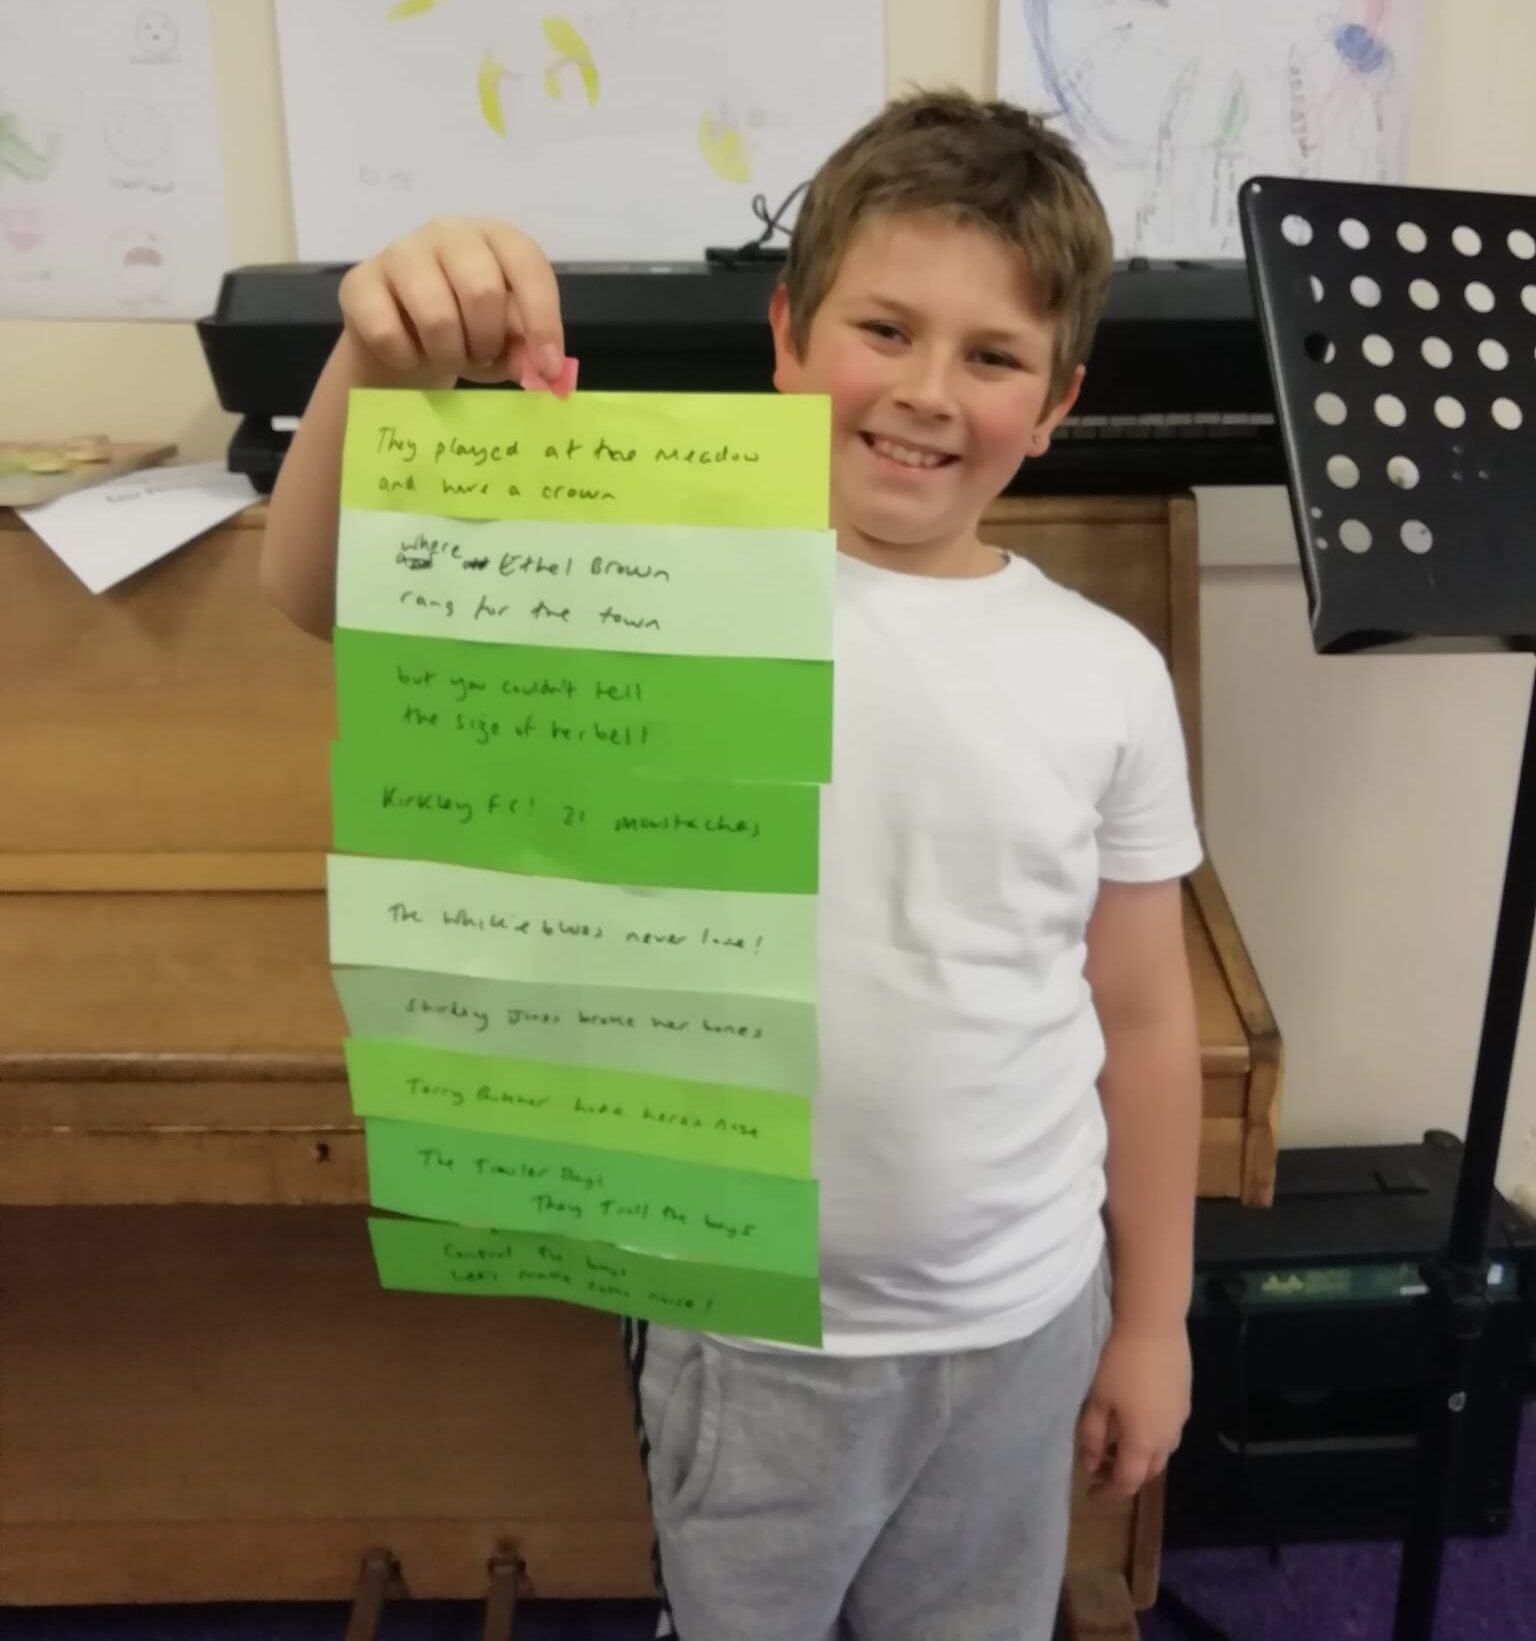 A young boy wearing white T-shirt and grey jogging trousers, holding up a poem written on strips of green paper